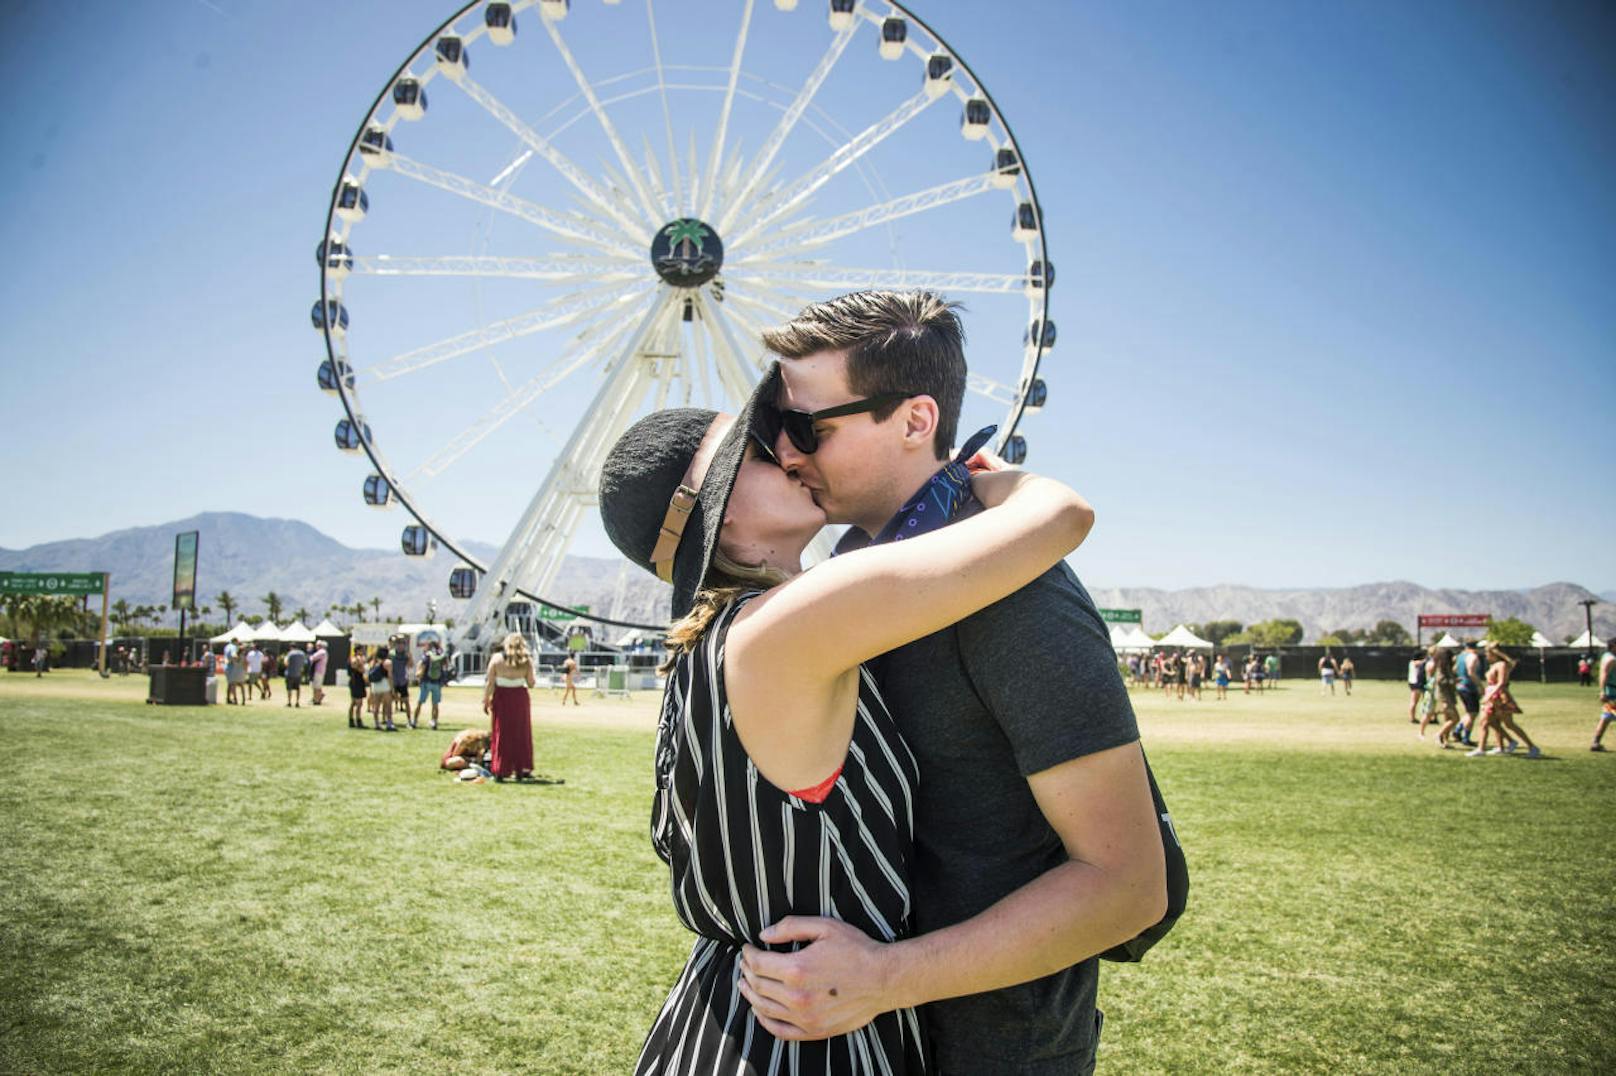 Festival goers Sarah Willetts, left, and Alex Deluccia embrace at Coachella Music & Arts Festival at the Empire Polo Club on Saturday, April 15, 2017, in Indio, Calif. (Photo by Amy Harris/Invision/AP)